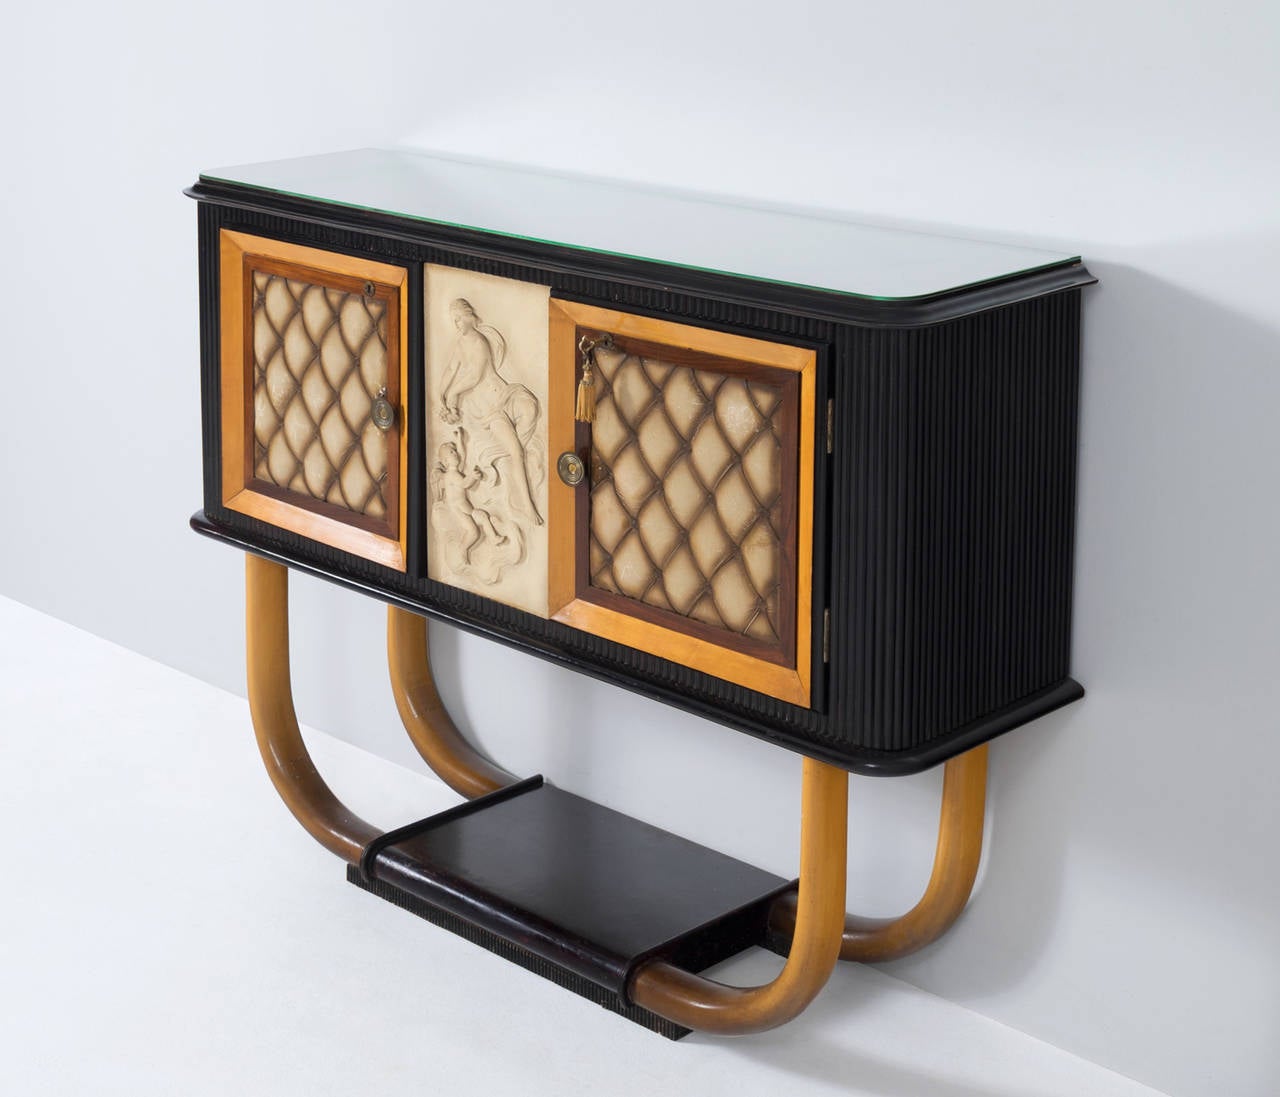 Very decorative and impressive Italian sideboard including dry bar option designed in the manner of Vittorio Dassi, Italy, 1950s.

This cabinet is made of a diversity of materials such as different types of wood, a glass top, brass details and